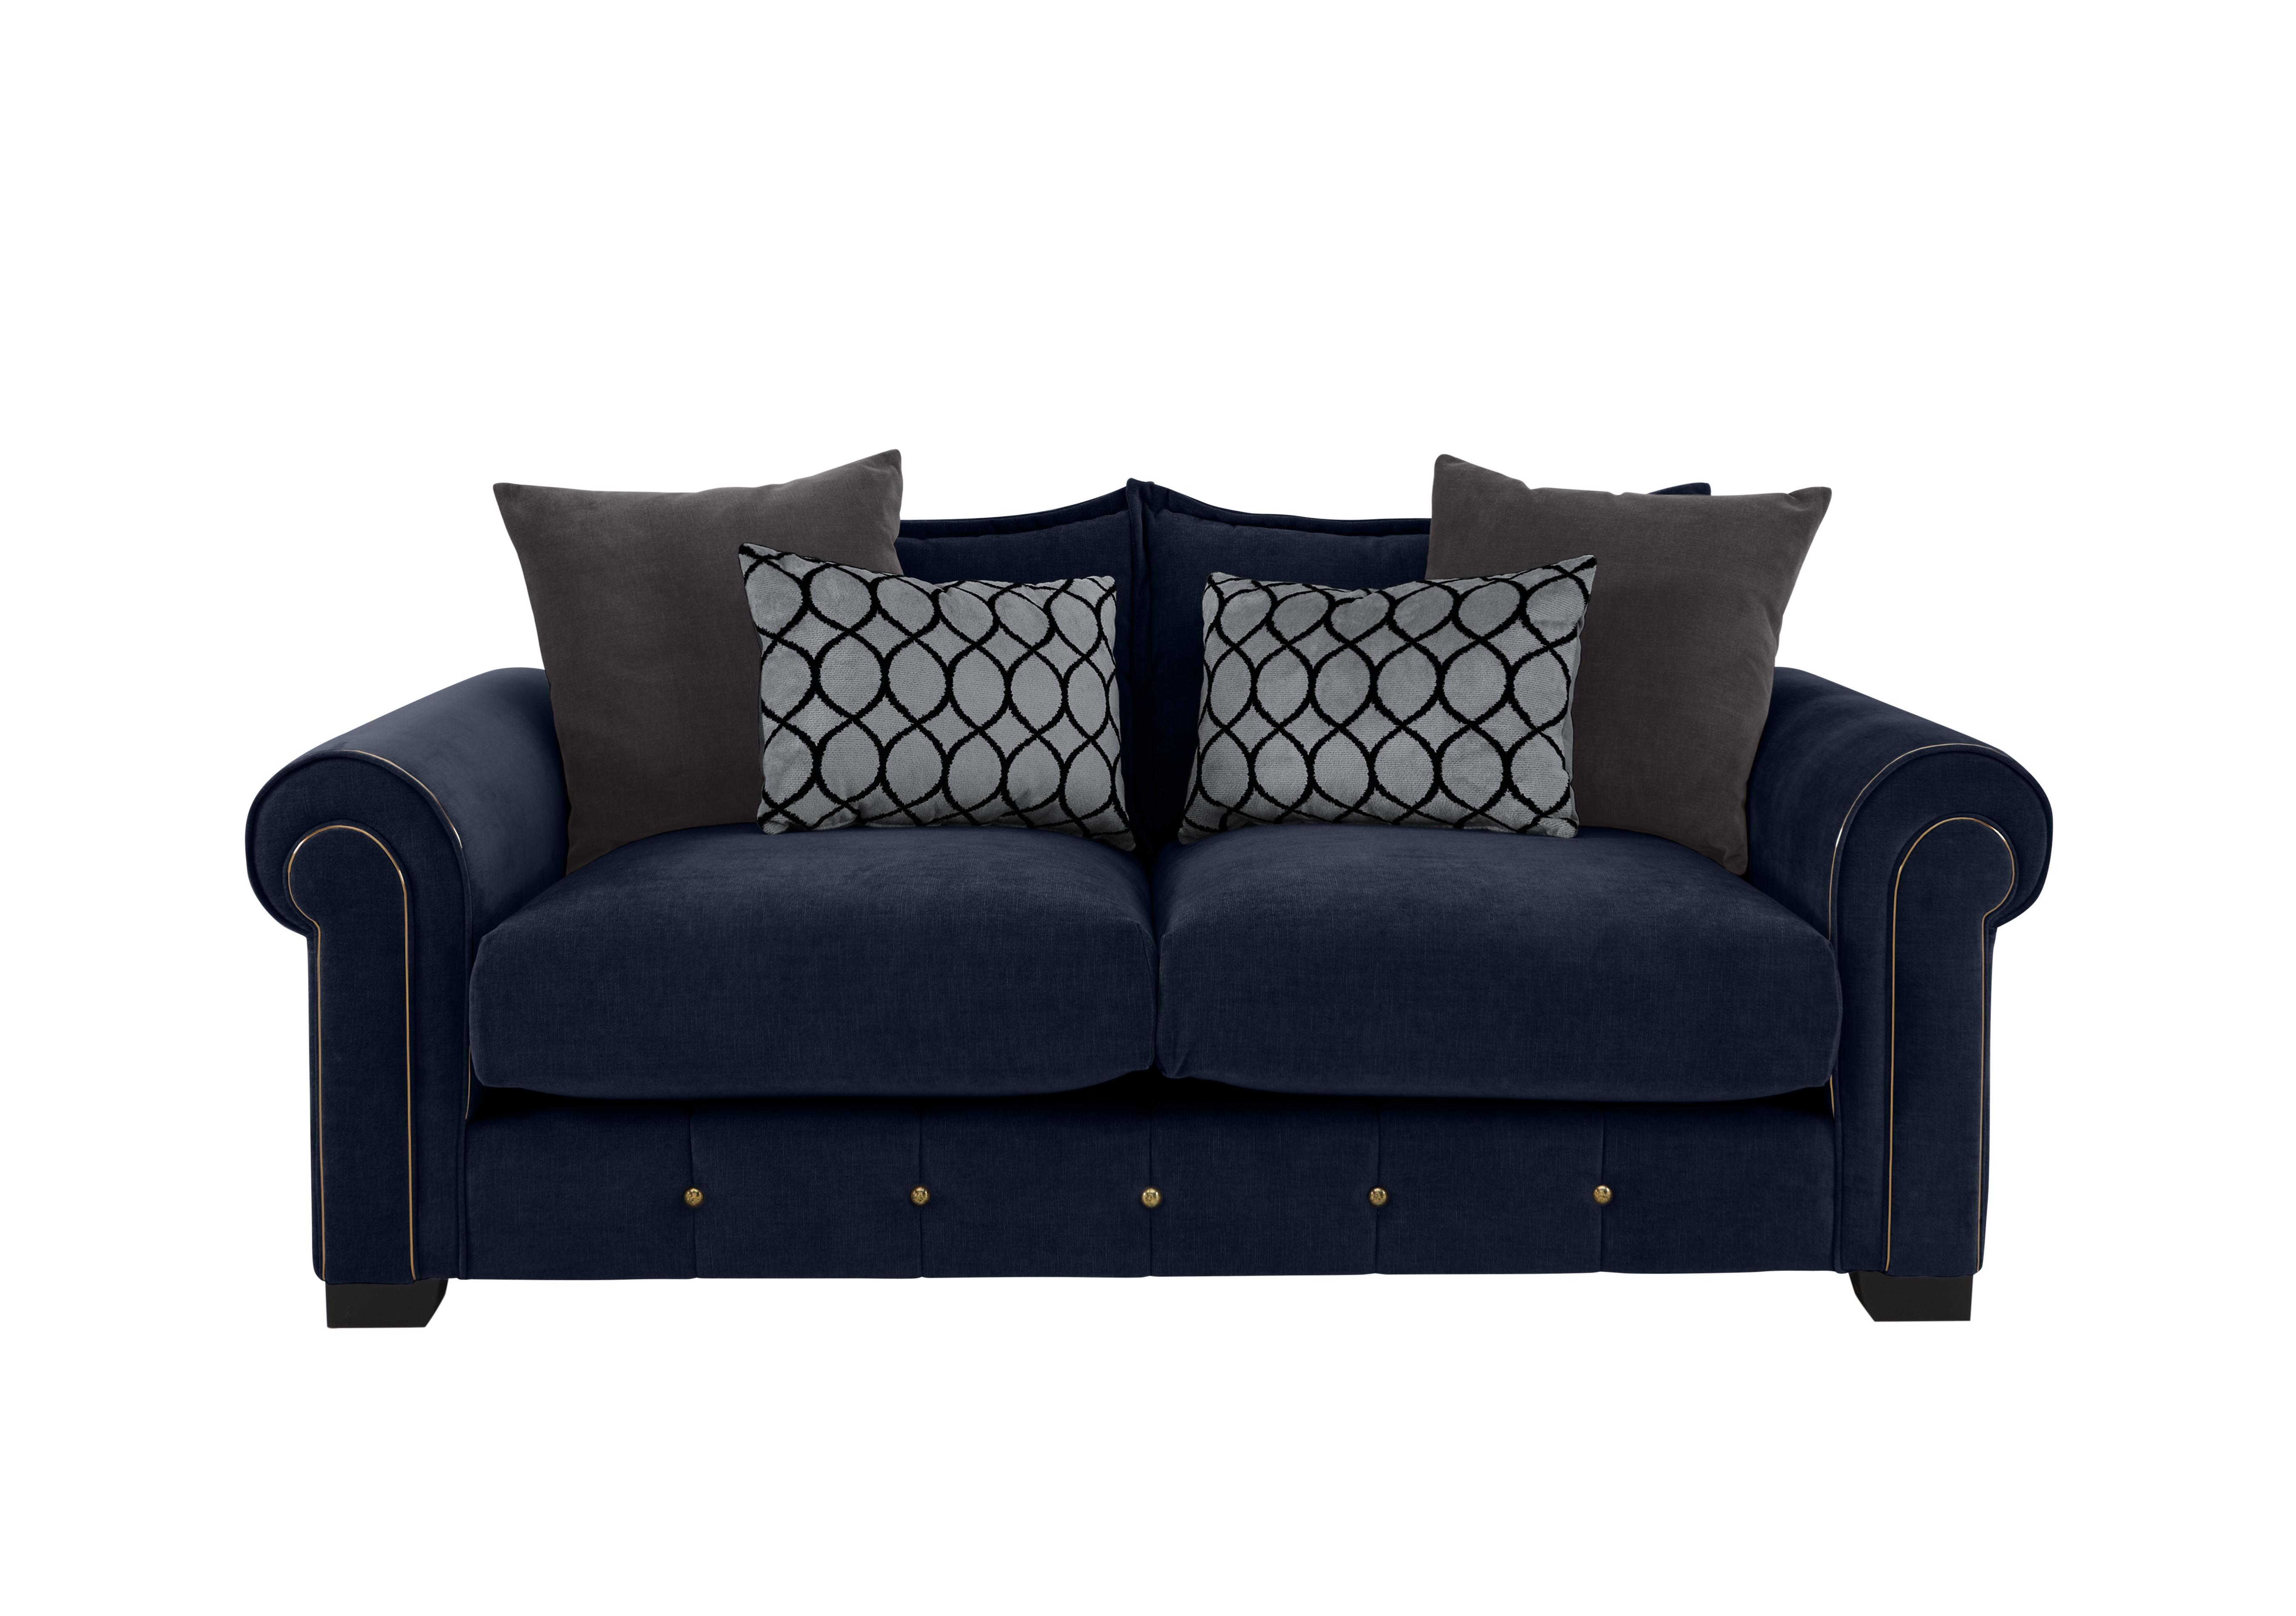 Sumptuous 3 Seater Fabric Sofa in Chamonix Navy Dk/Gold on Furniture Village